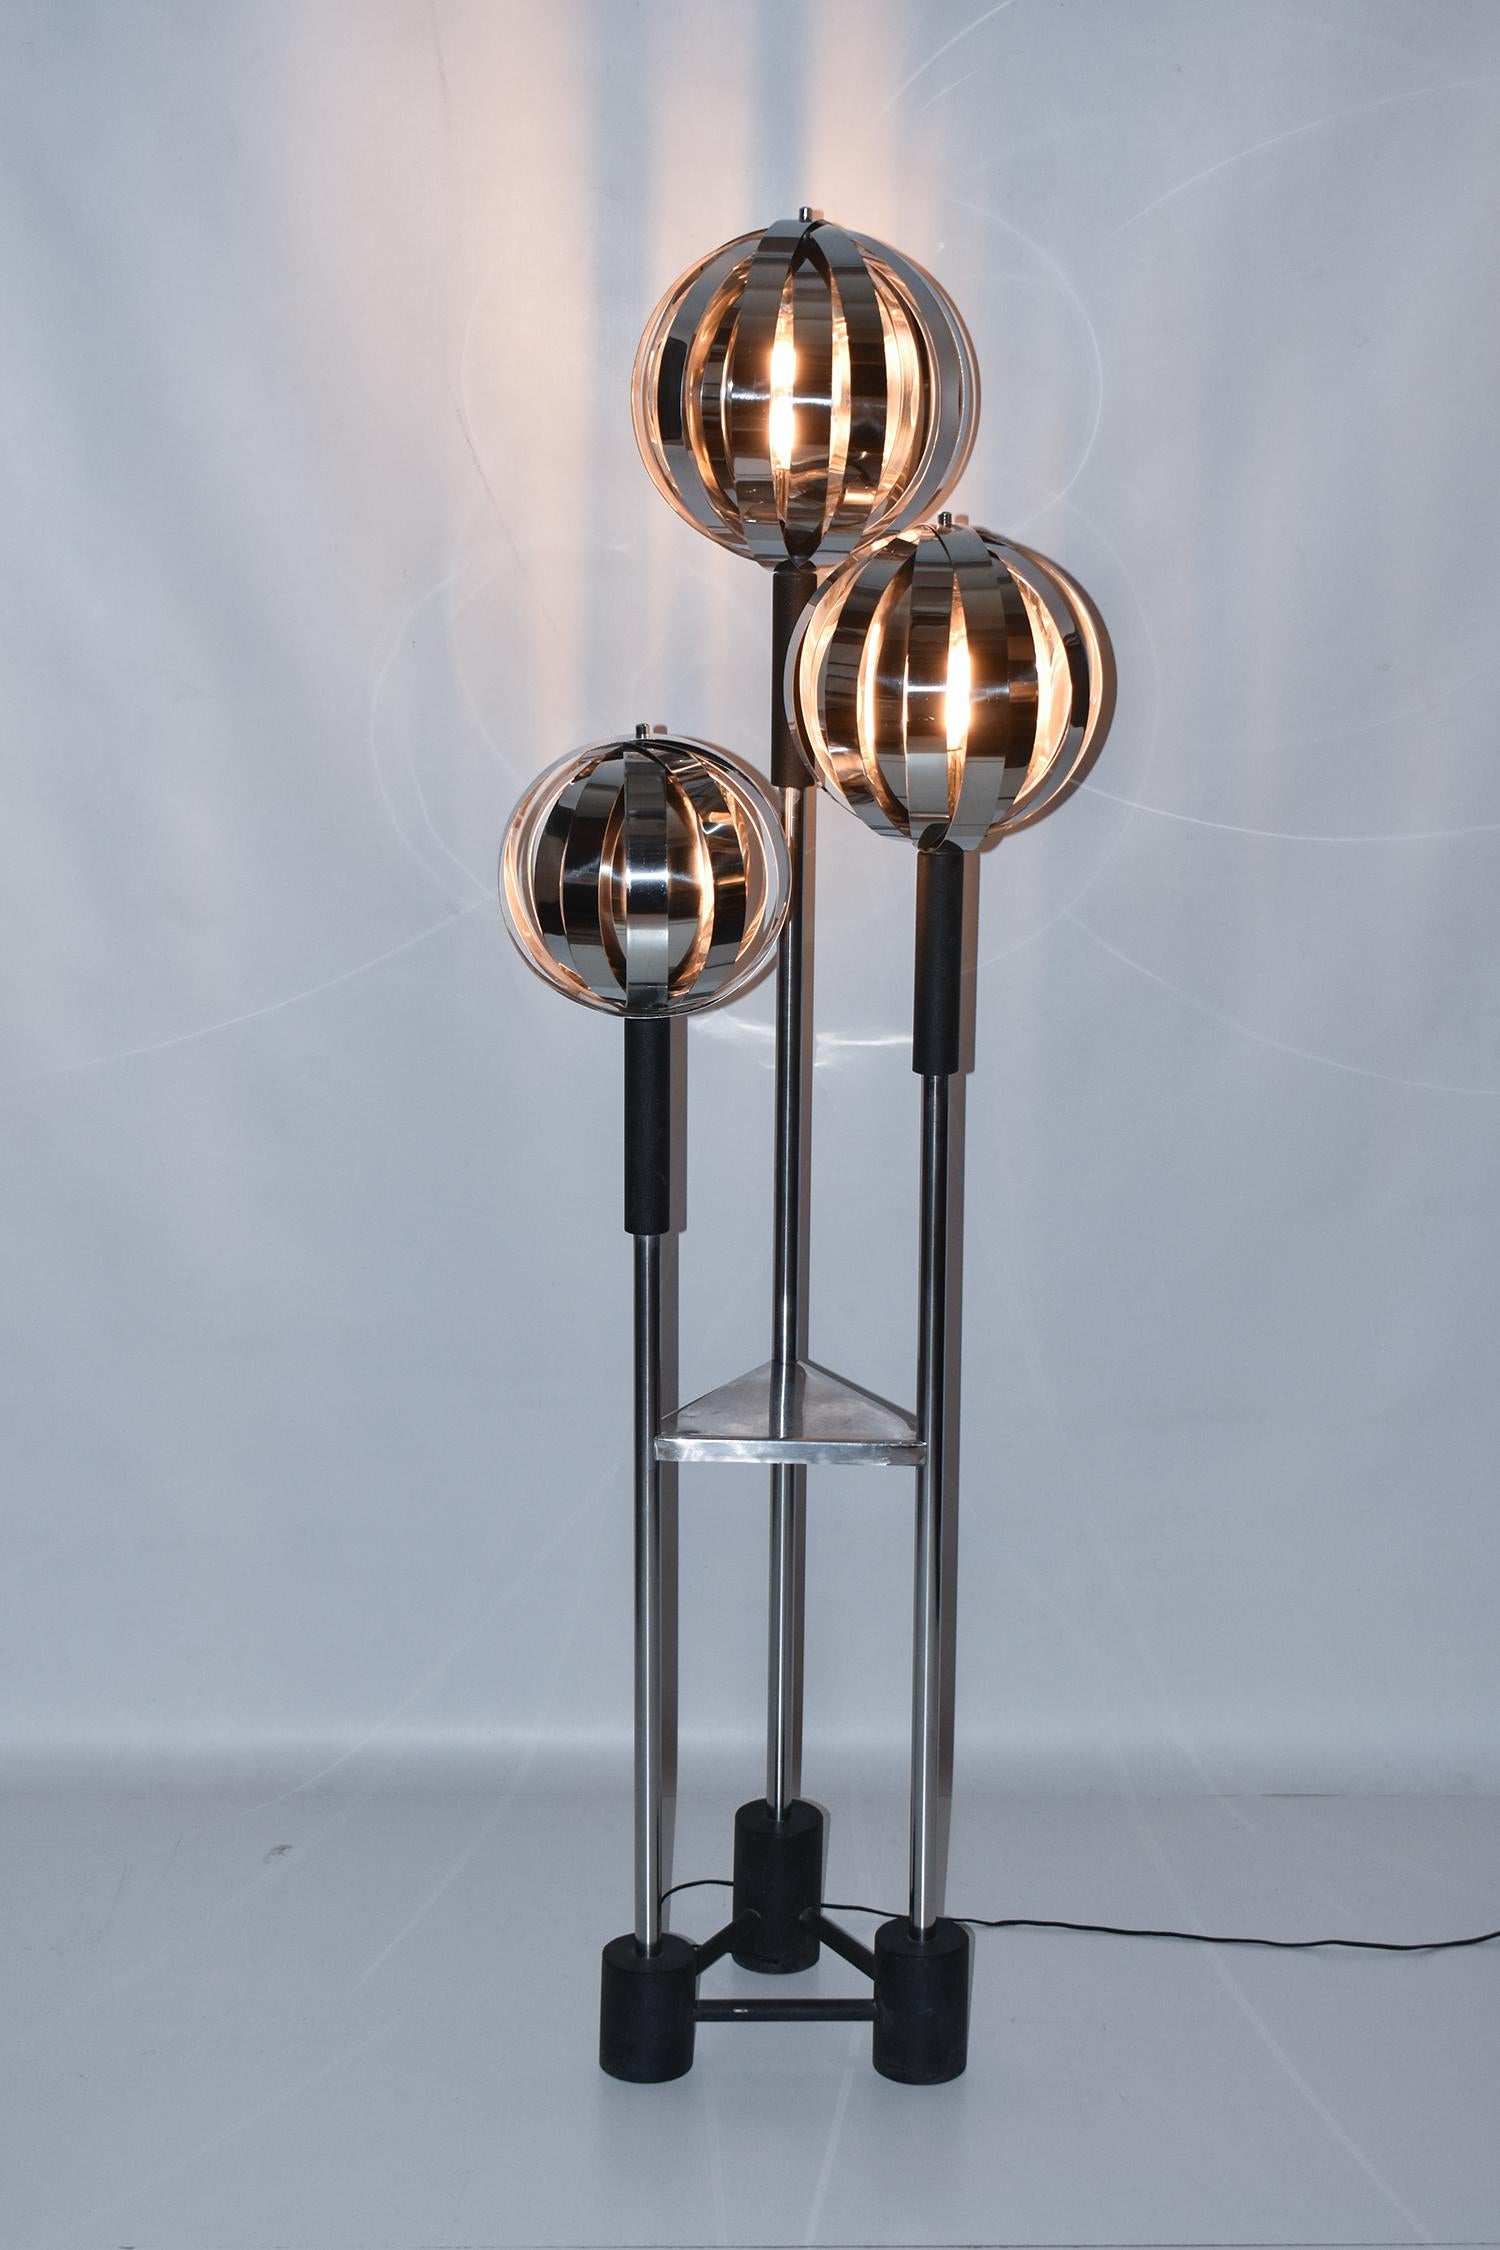 Floor lamp with three moon shades.
Shades made of polished steel rings with different diameter, chrome metal structure and heavy black enamelled iron base.
